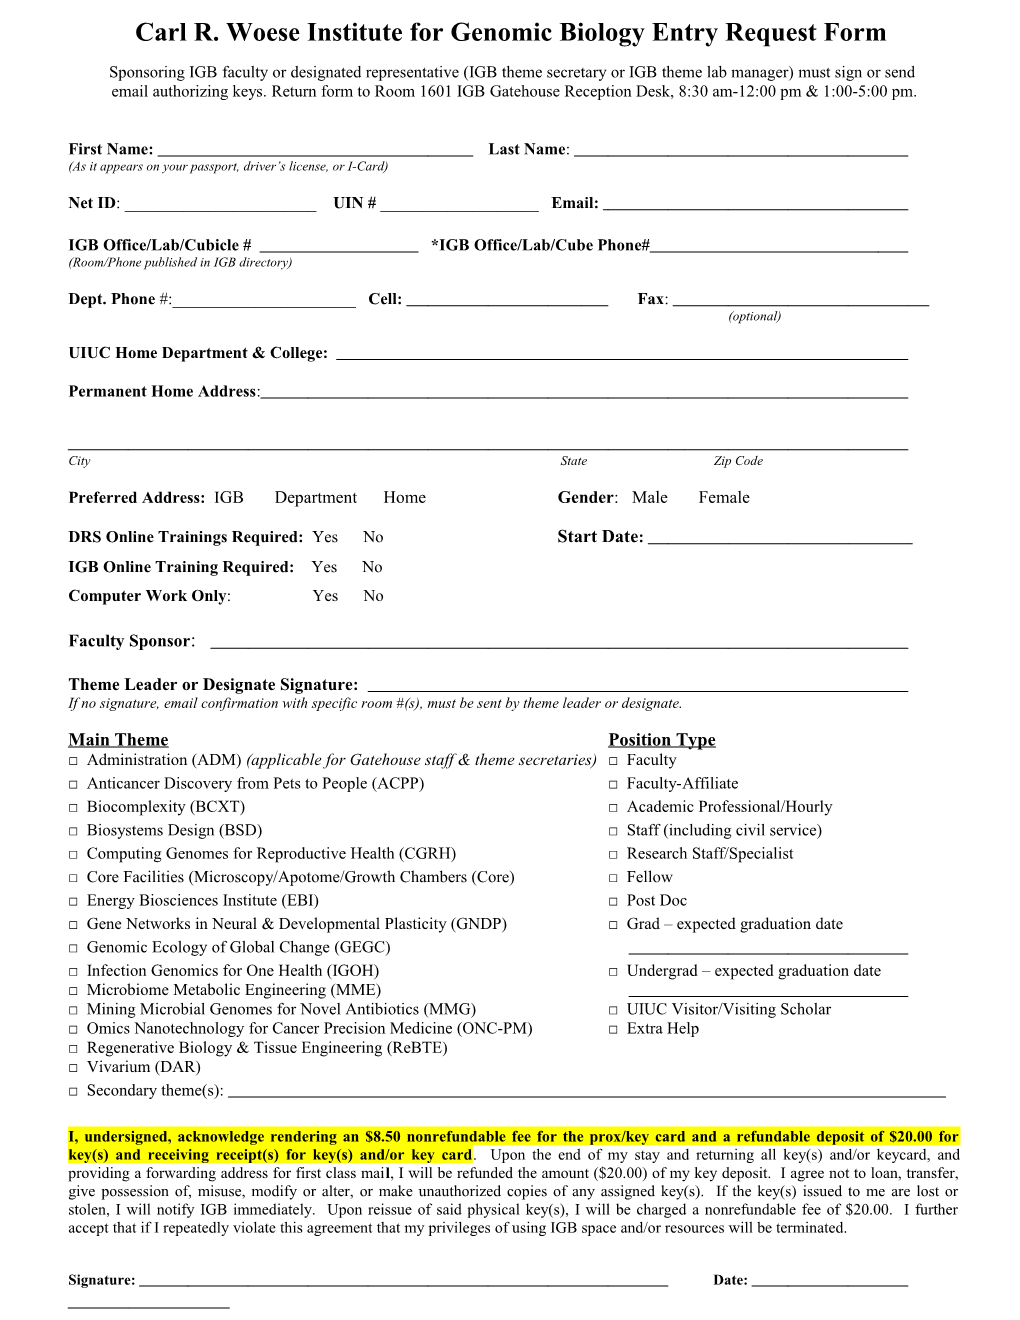 Carl R. Woese Institute for Genomic Biology Entry Request Form